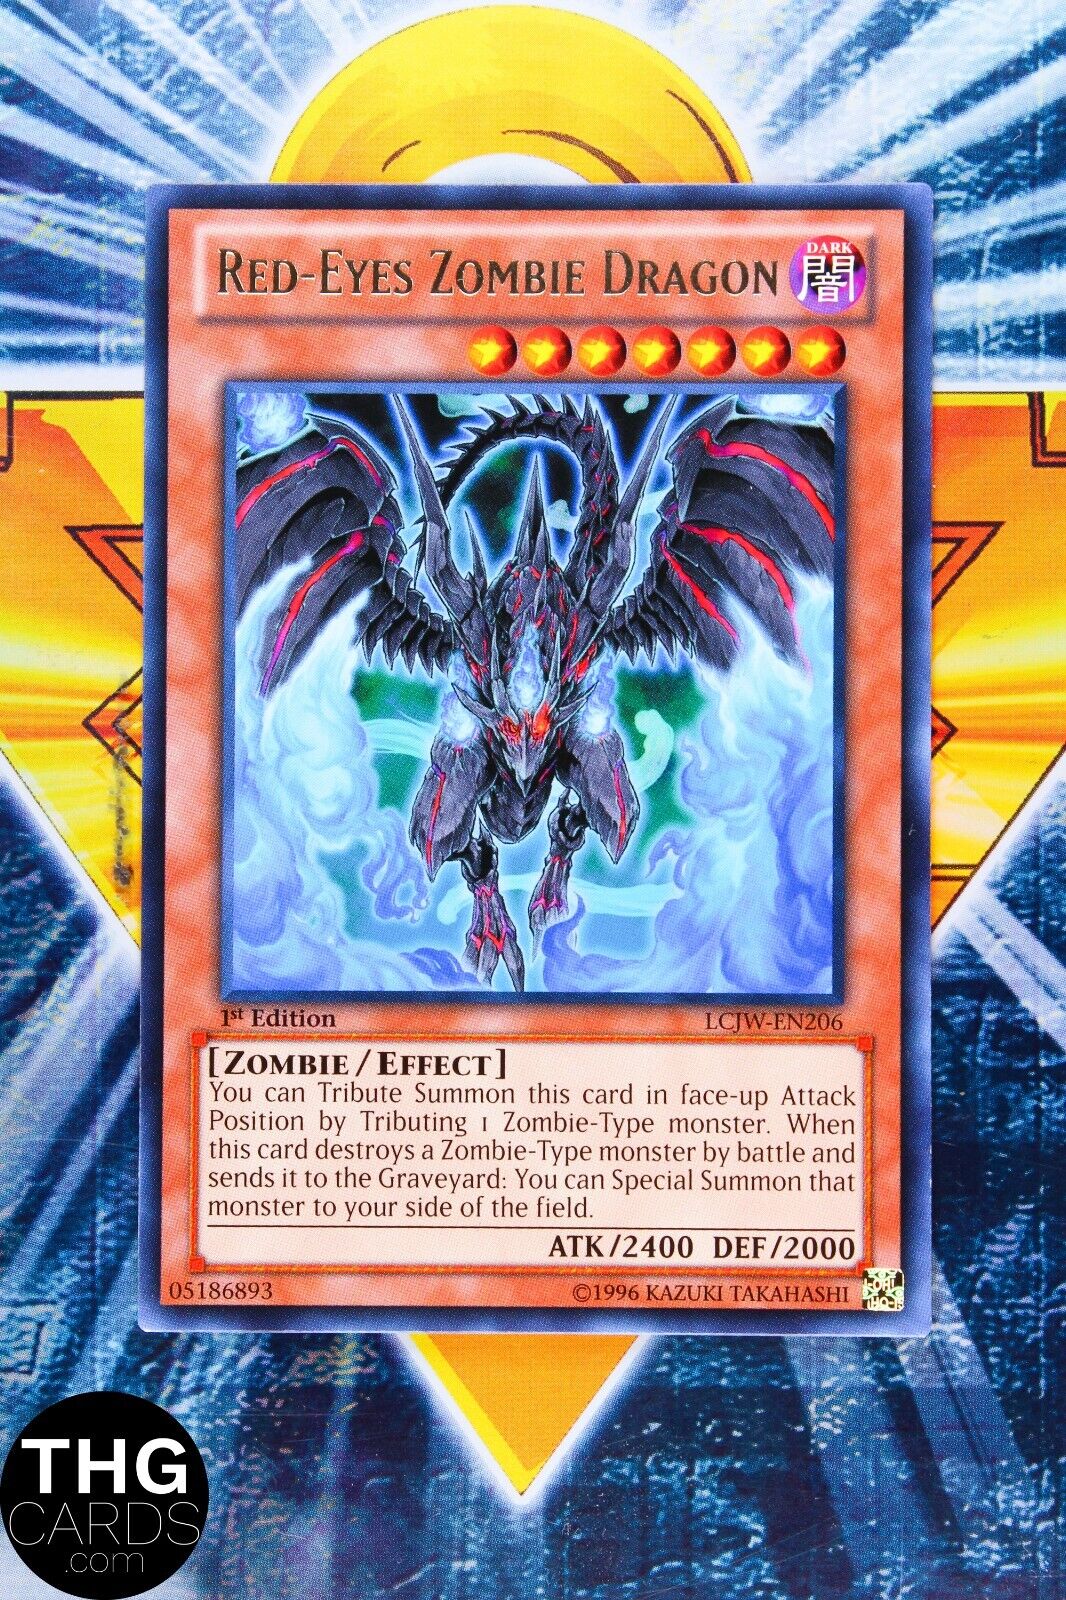 Red-Eyes Zombie Dragon LCJW-EN206 1st Edition Rare Yugioh Card